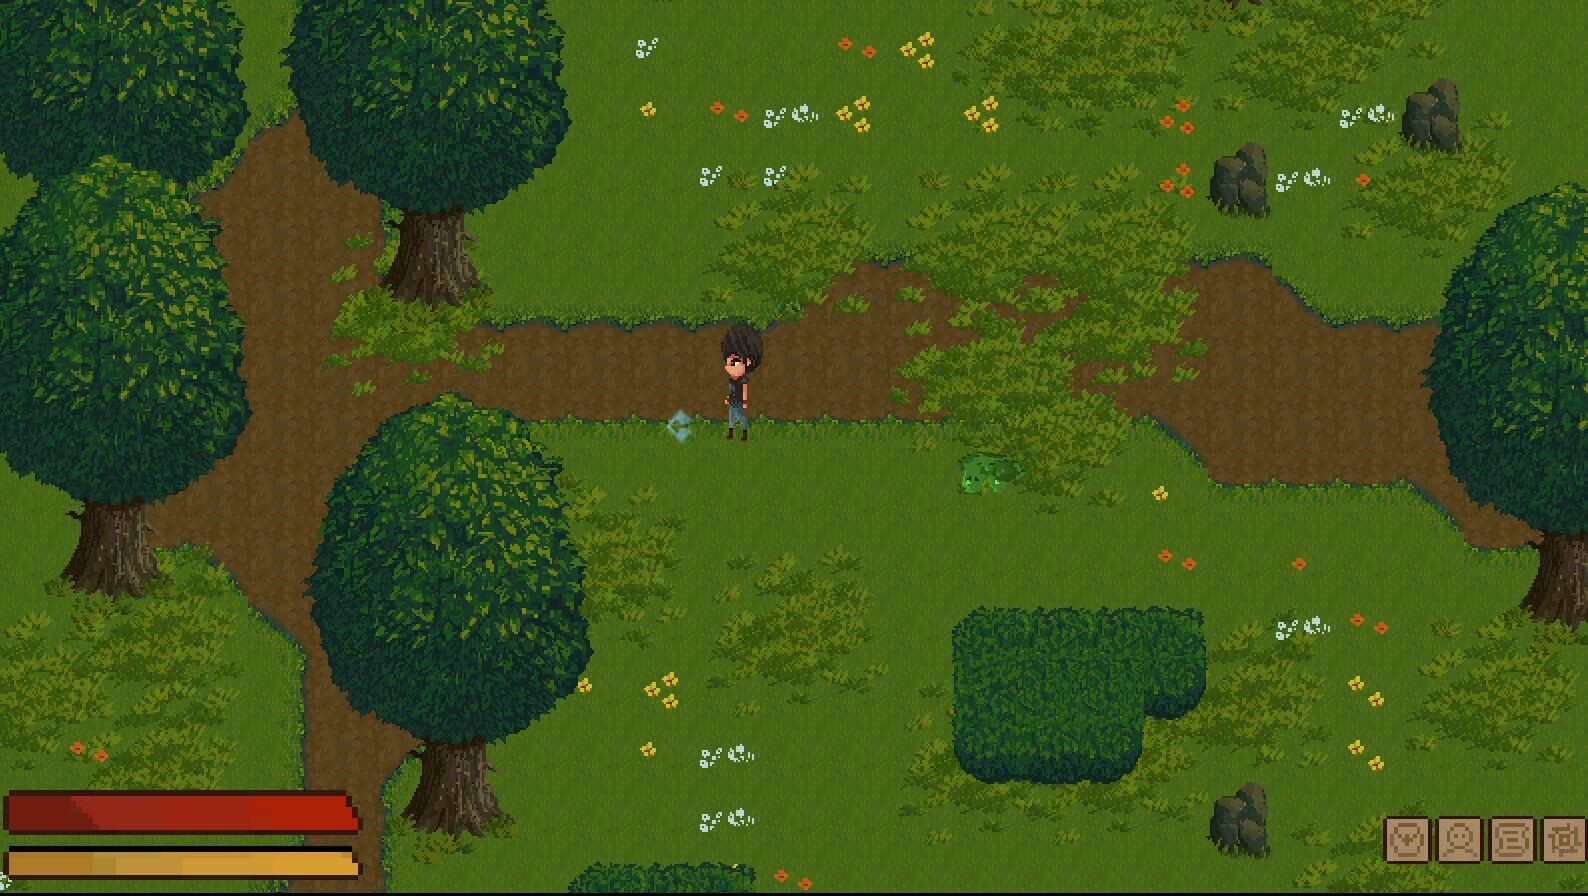 2d rpg games made with unity